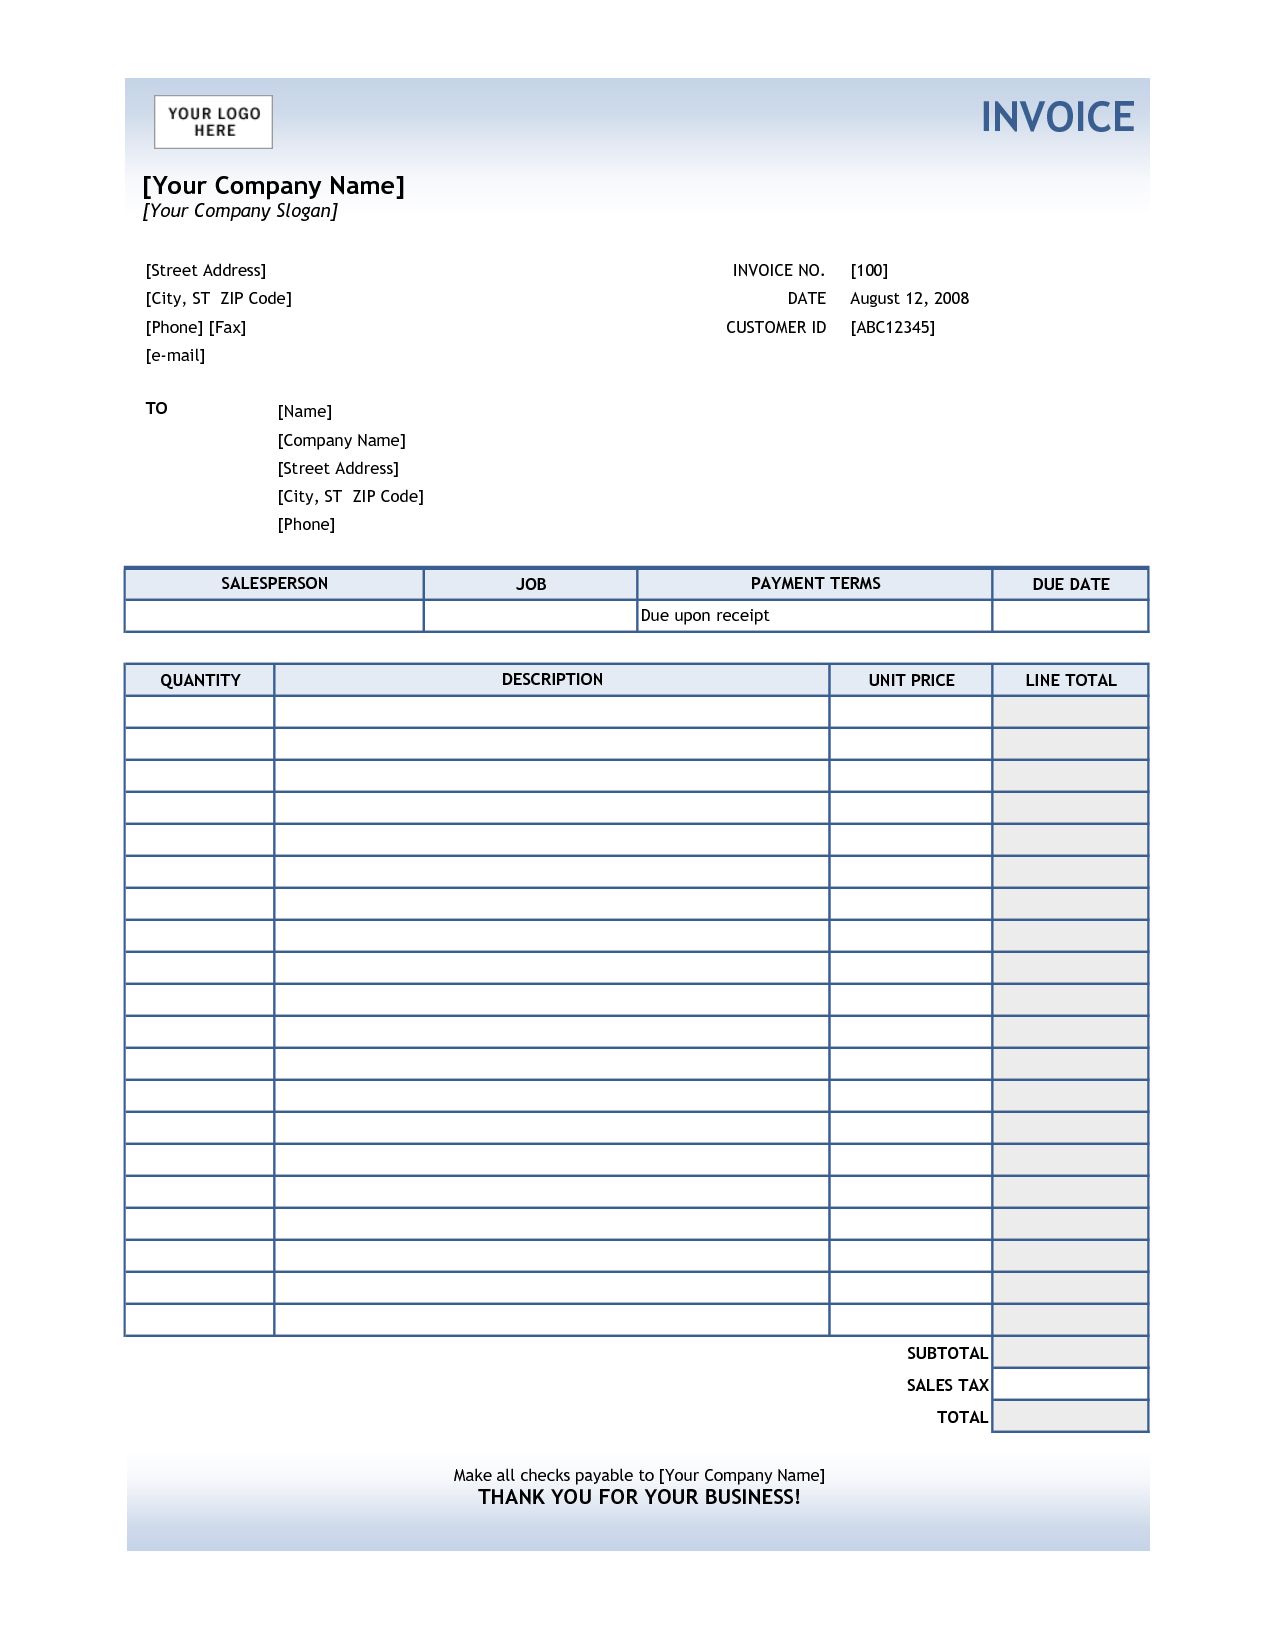 Service Invoice Template Excel invoice example